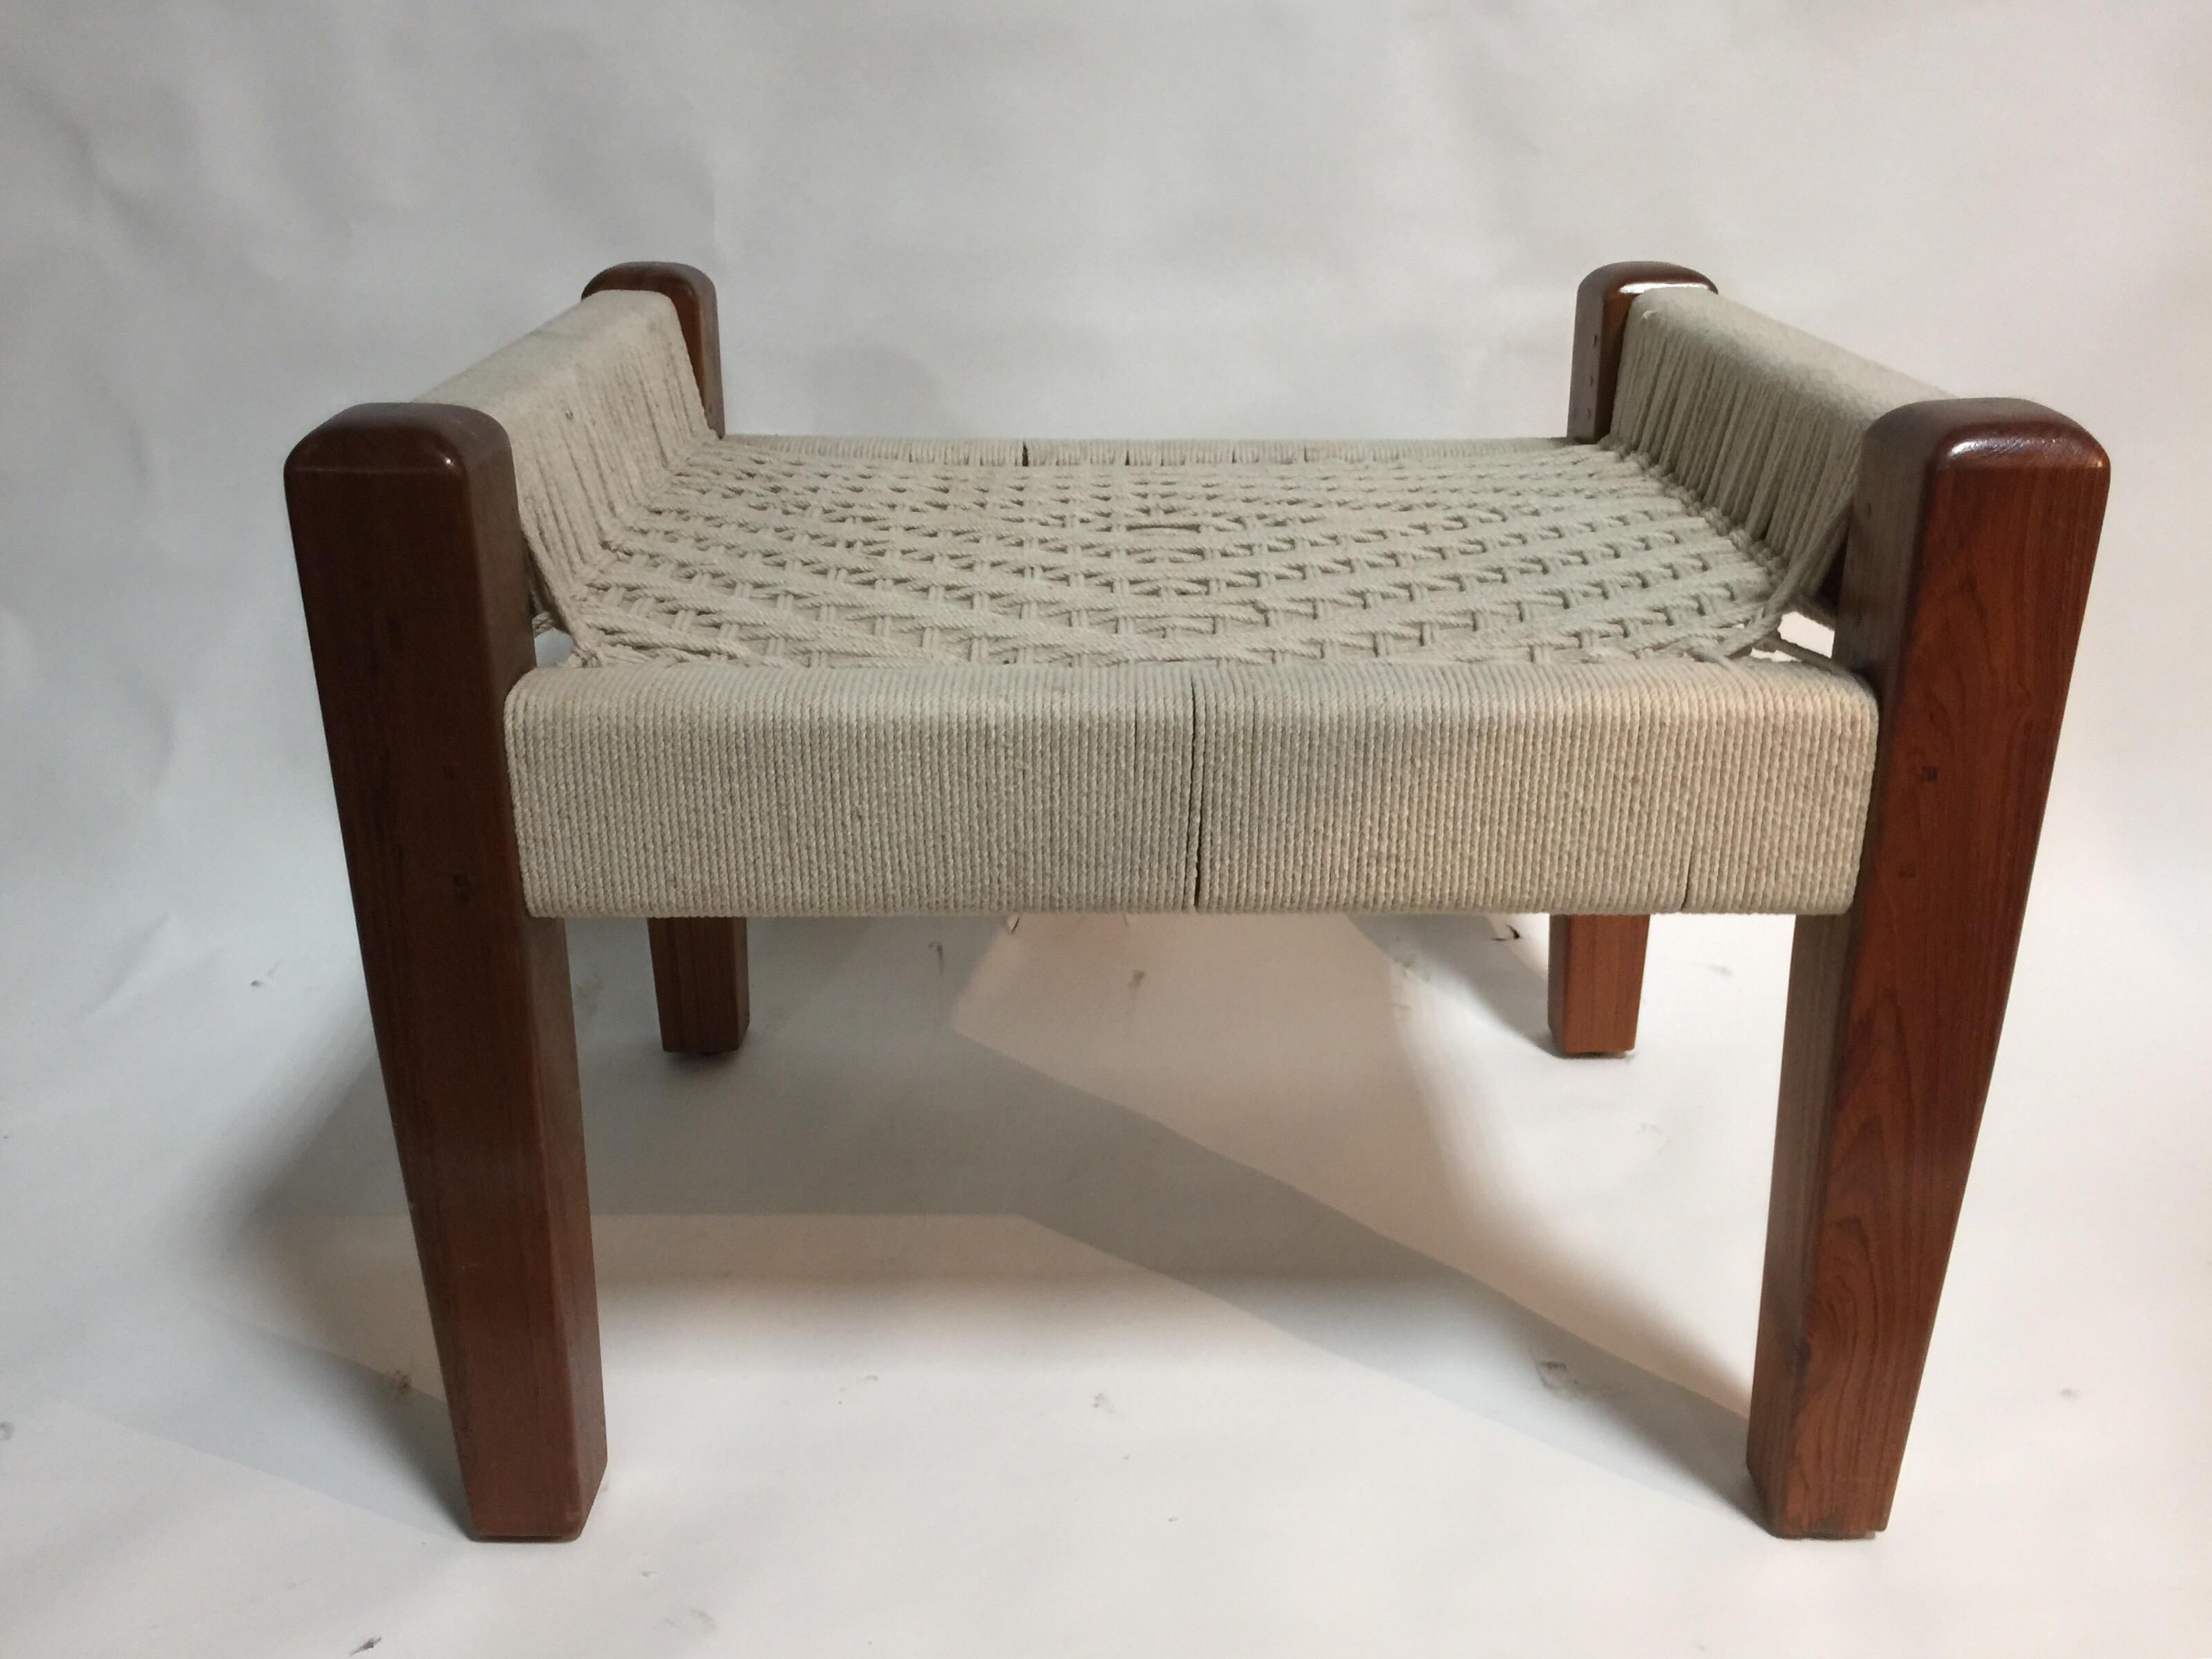 A Shikari natural French-polished teak and cotton cord bench from Mufti Designs by Michael D'Souza. Originally custom made for a residence in East Hampton, NY designed by Thom Filicia. England, circa 2000.

Expertly handwoven all-natural rope and